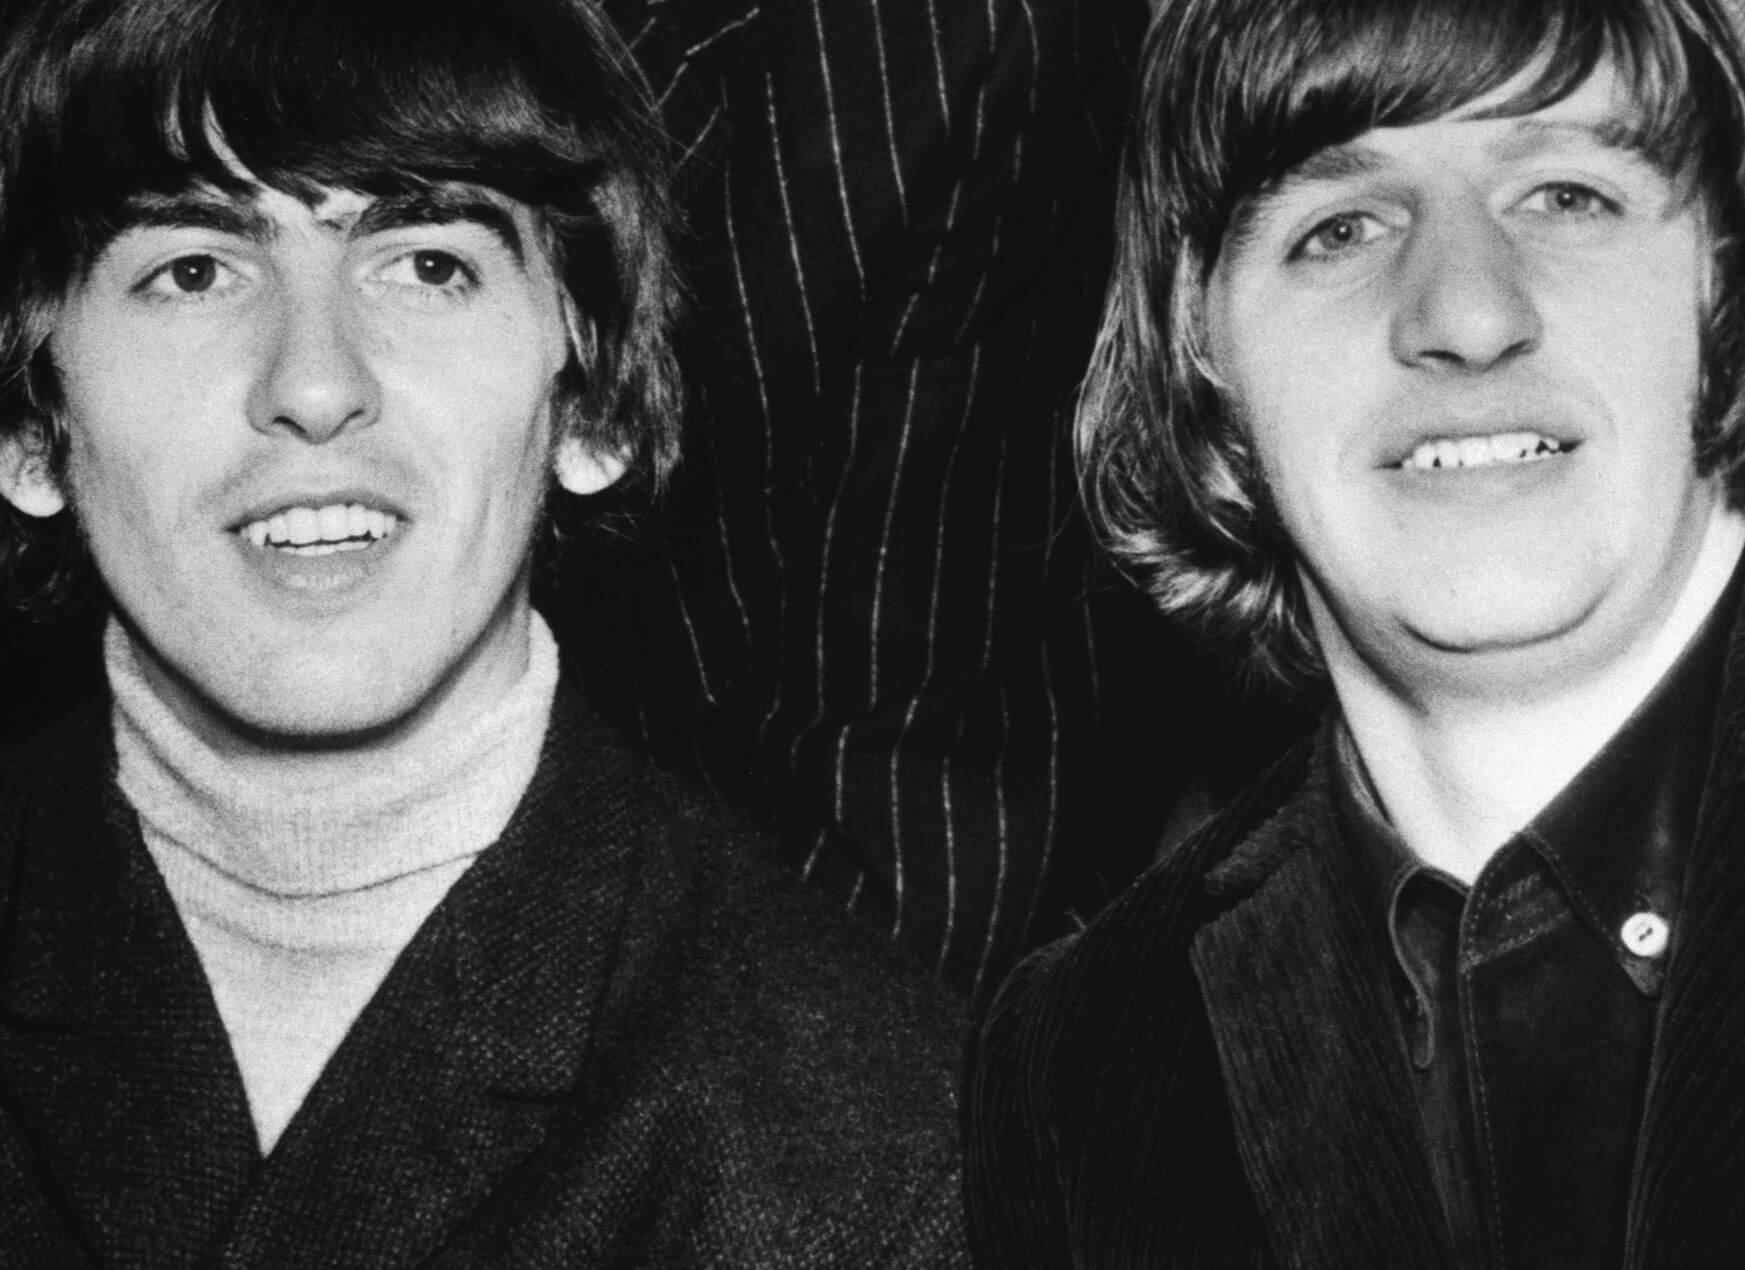 George Harrison and Ringo Starr in black-and-white photograph